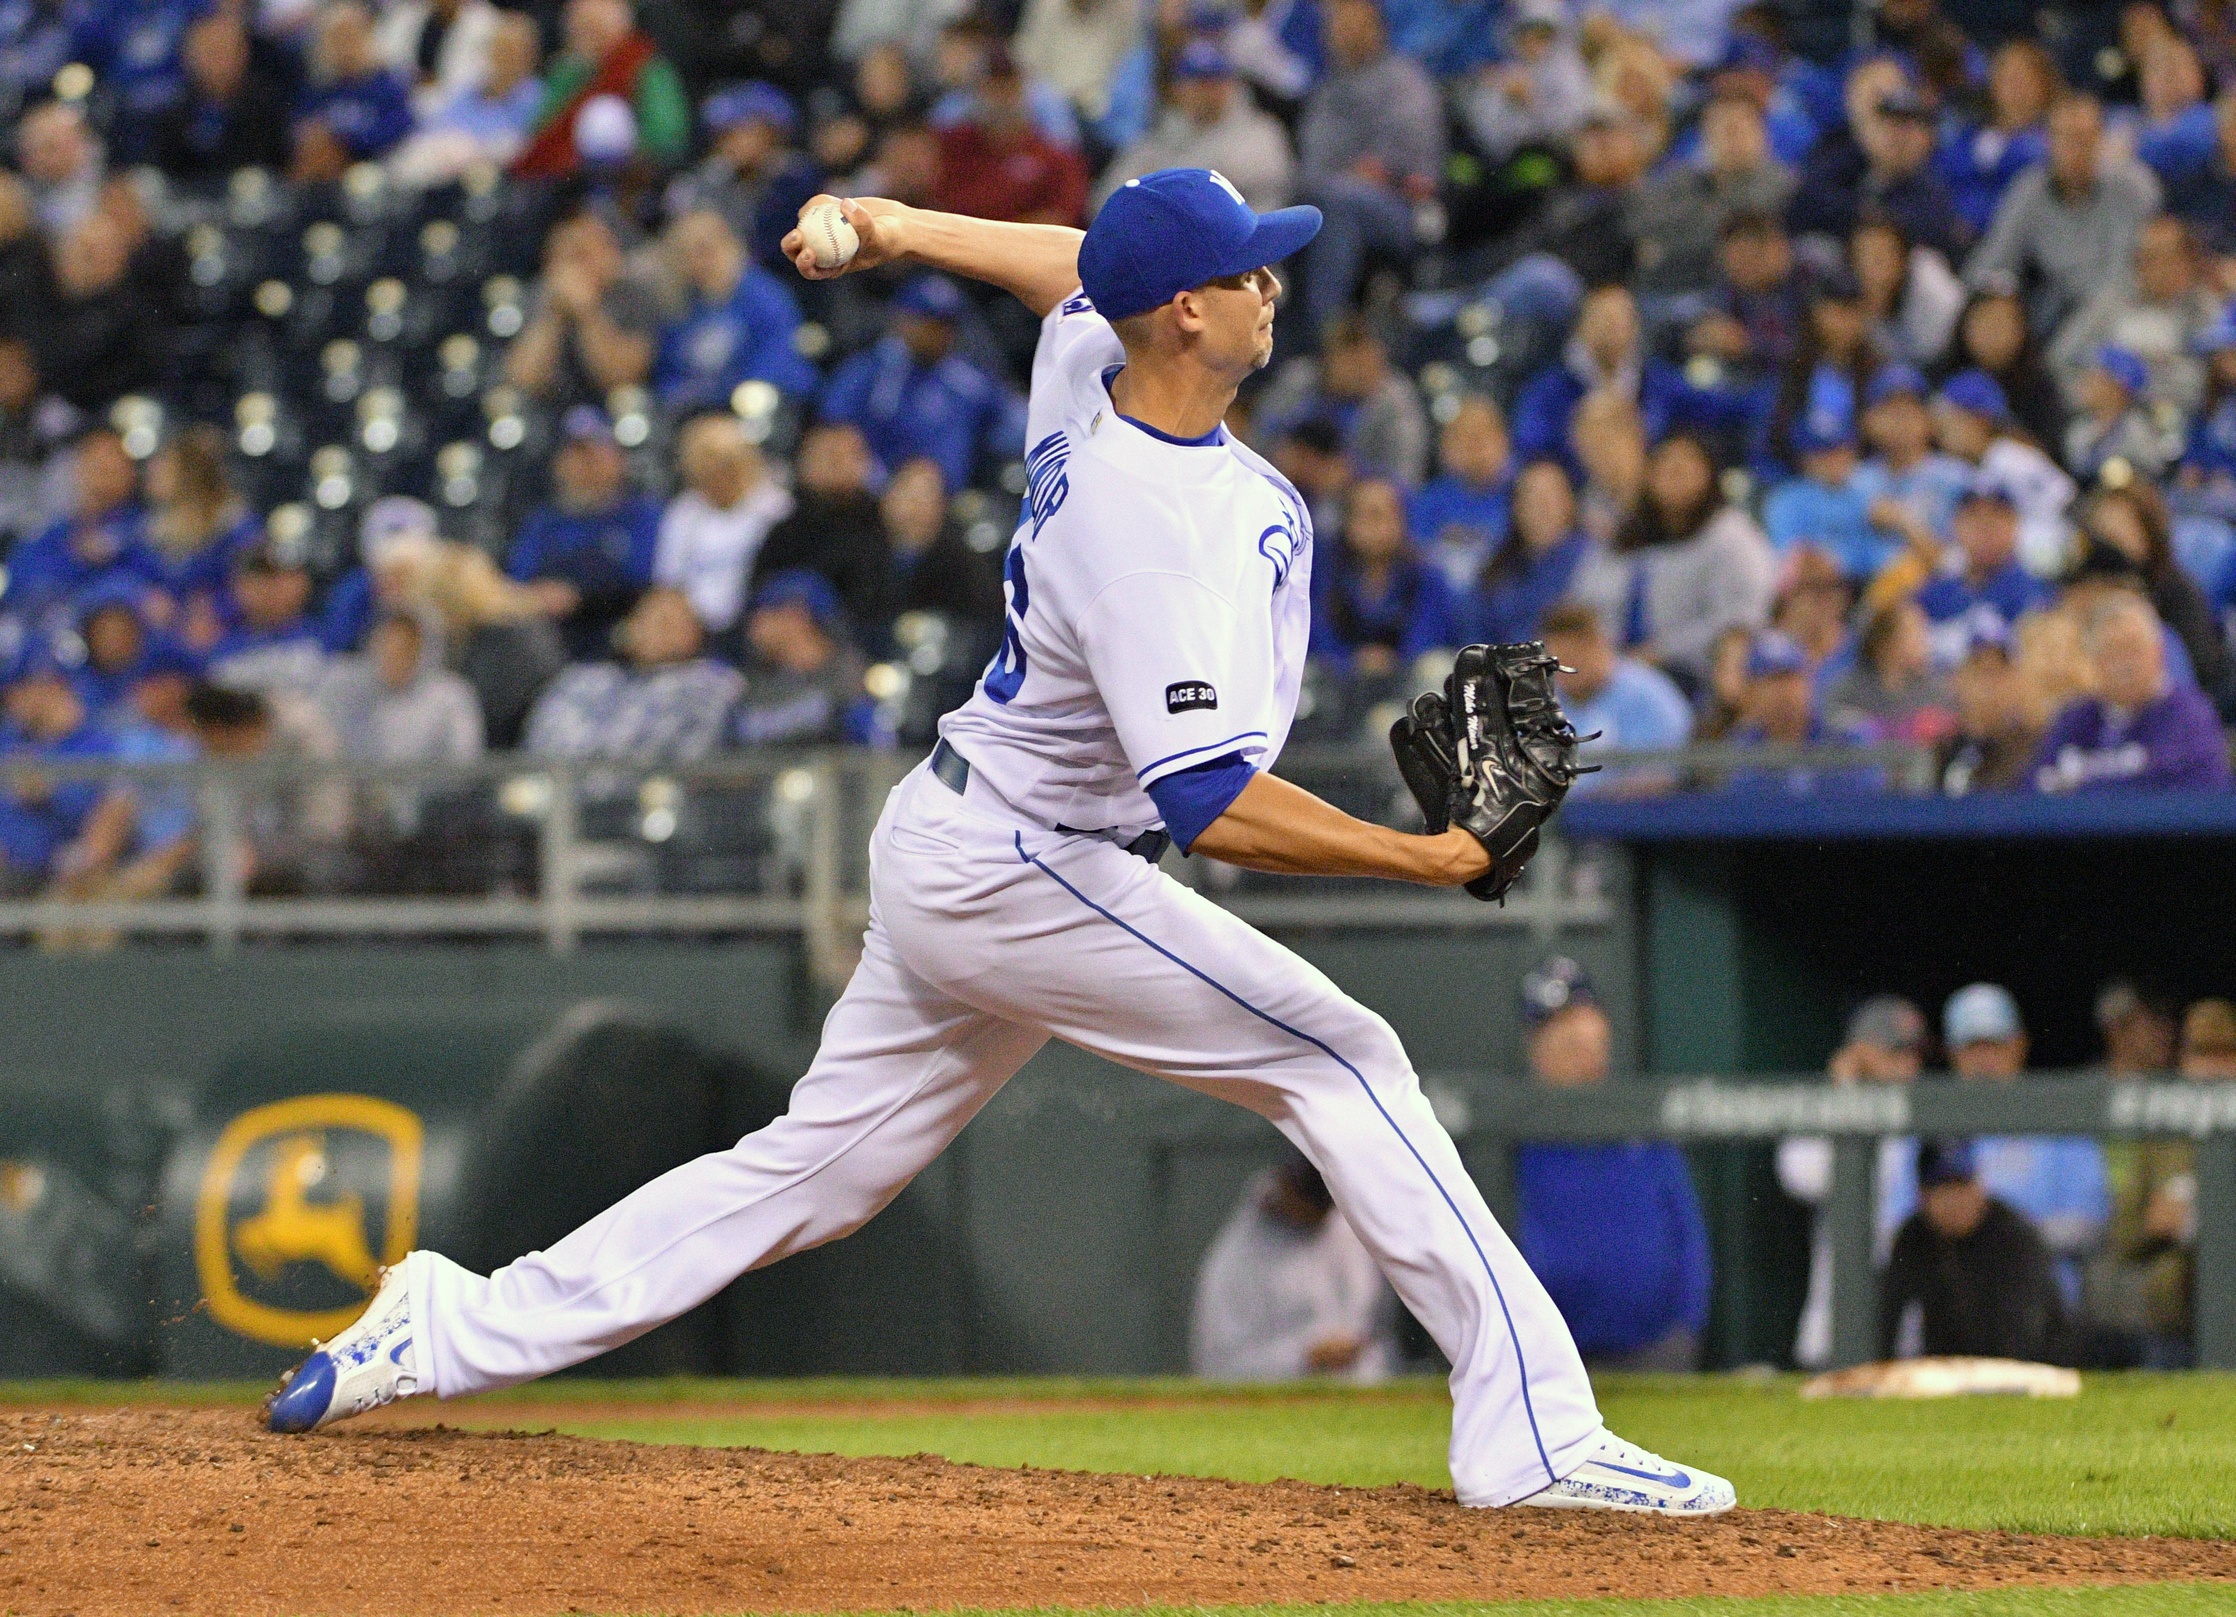 Sep 26, 2017; Kansas City, MO, USA; Kansas City Royals relief pitcher Mike Minor (26) delivers a pitch in the ninth inning against the Detroit Tigers at Kauffman Stadium. Mandatory Credit: Denny Medley-USA TODAY Sports